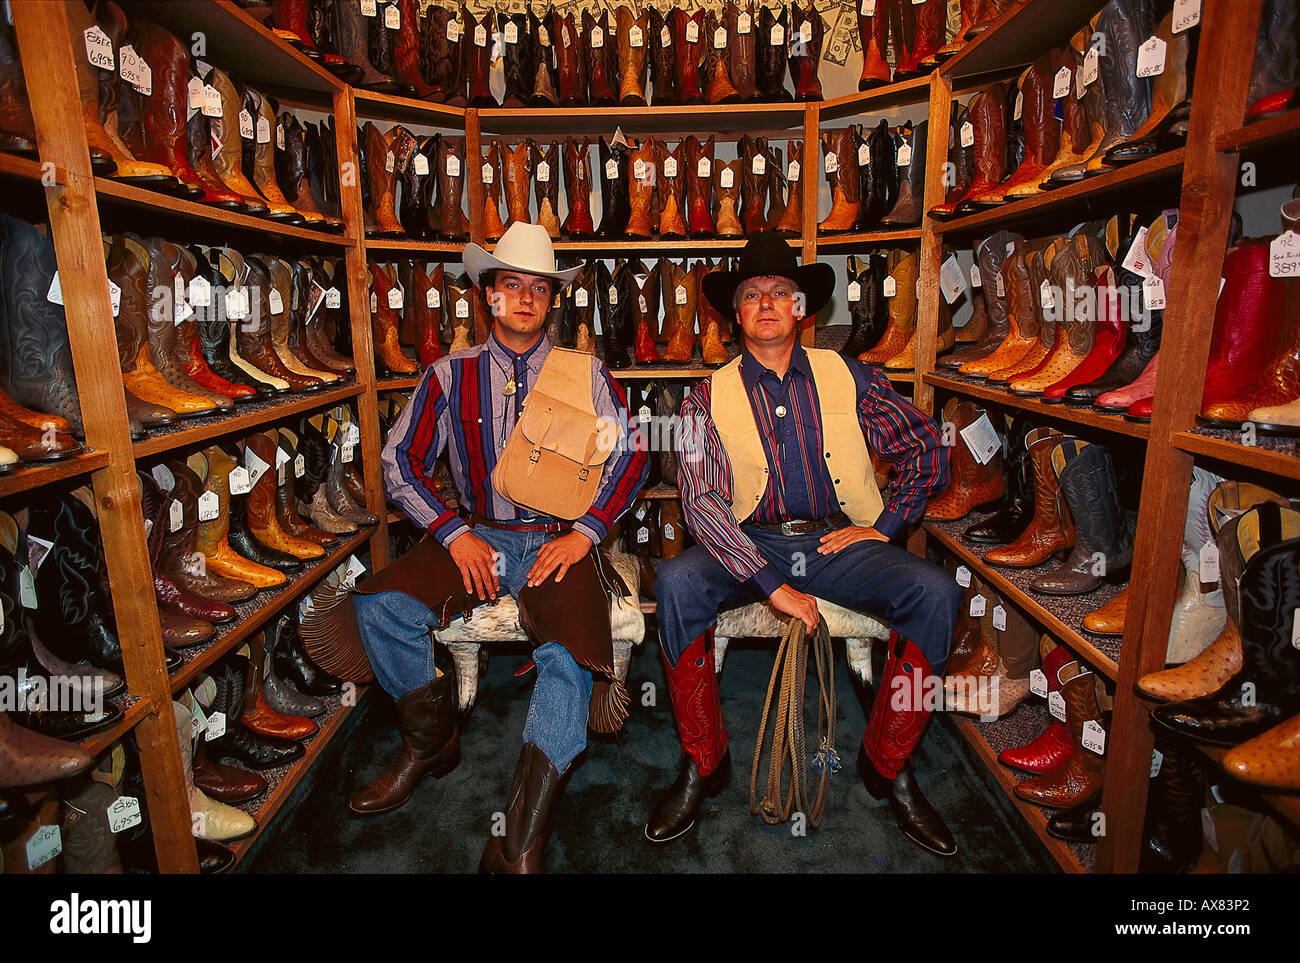 Two men wearing cowboy hats in a shop with cowboy boots, Fort Worth, Texas, USA, America Stock Photo